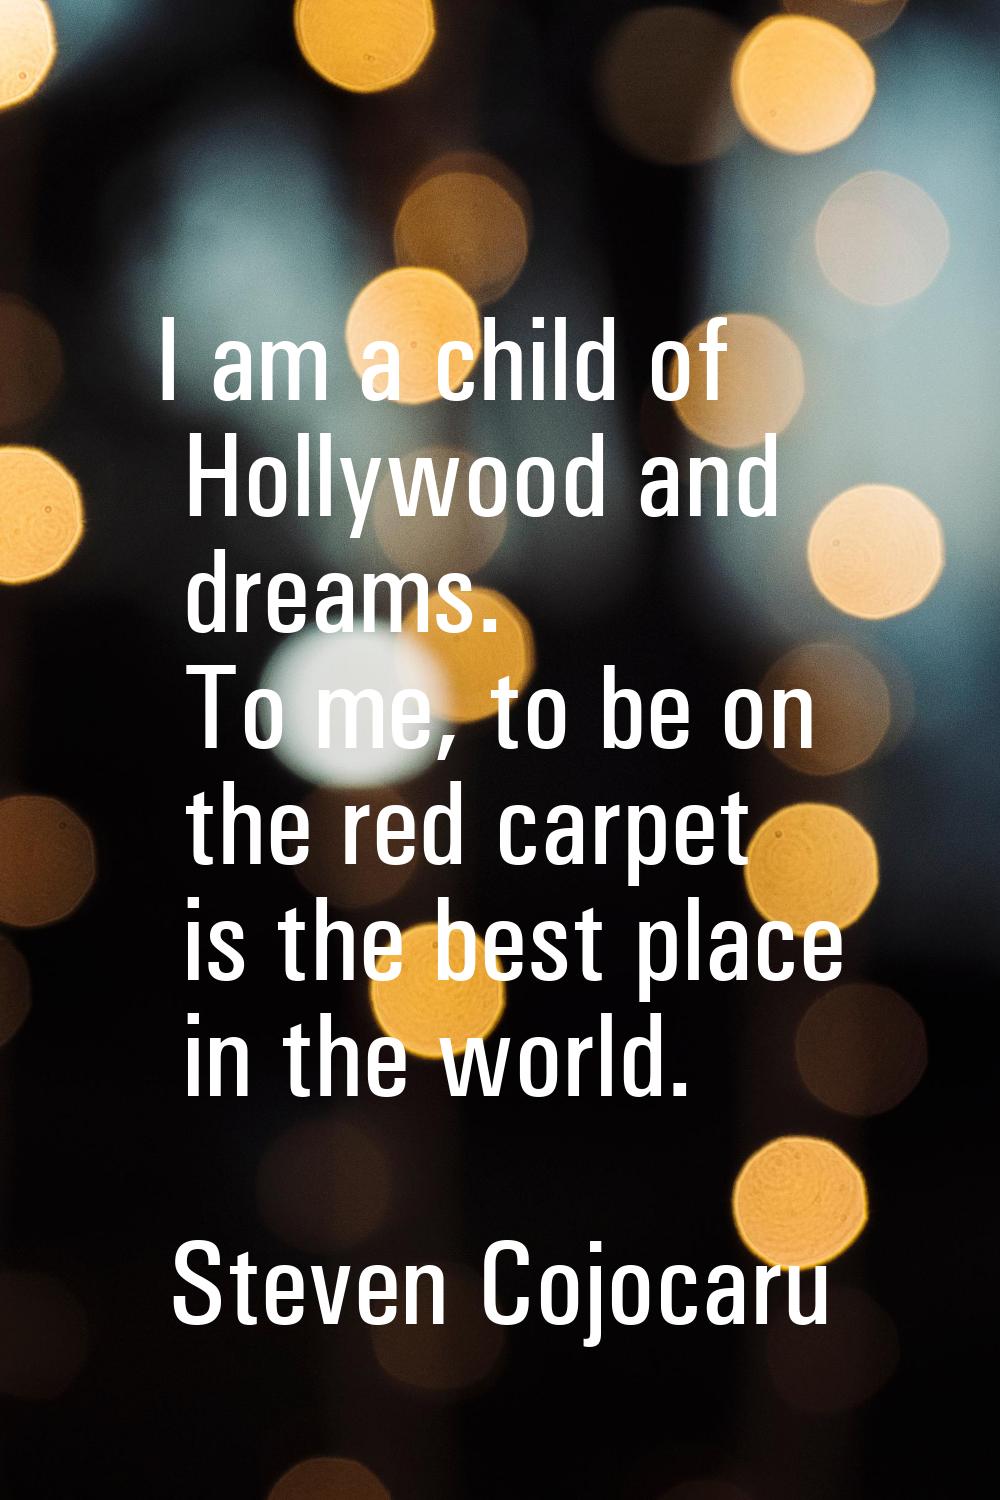 I am a child of Hollywood and dreams. To me, to be on the red carpet is the best place in the world